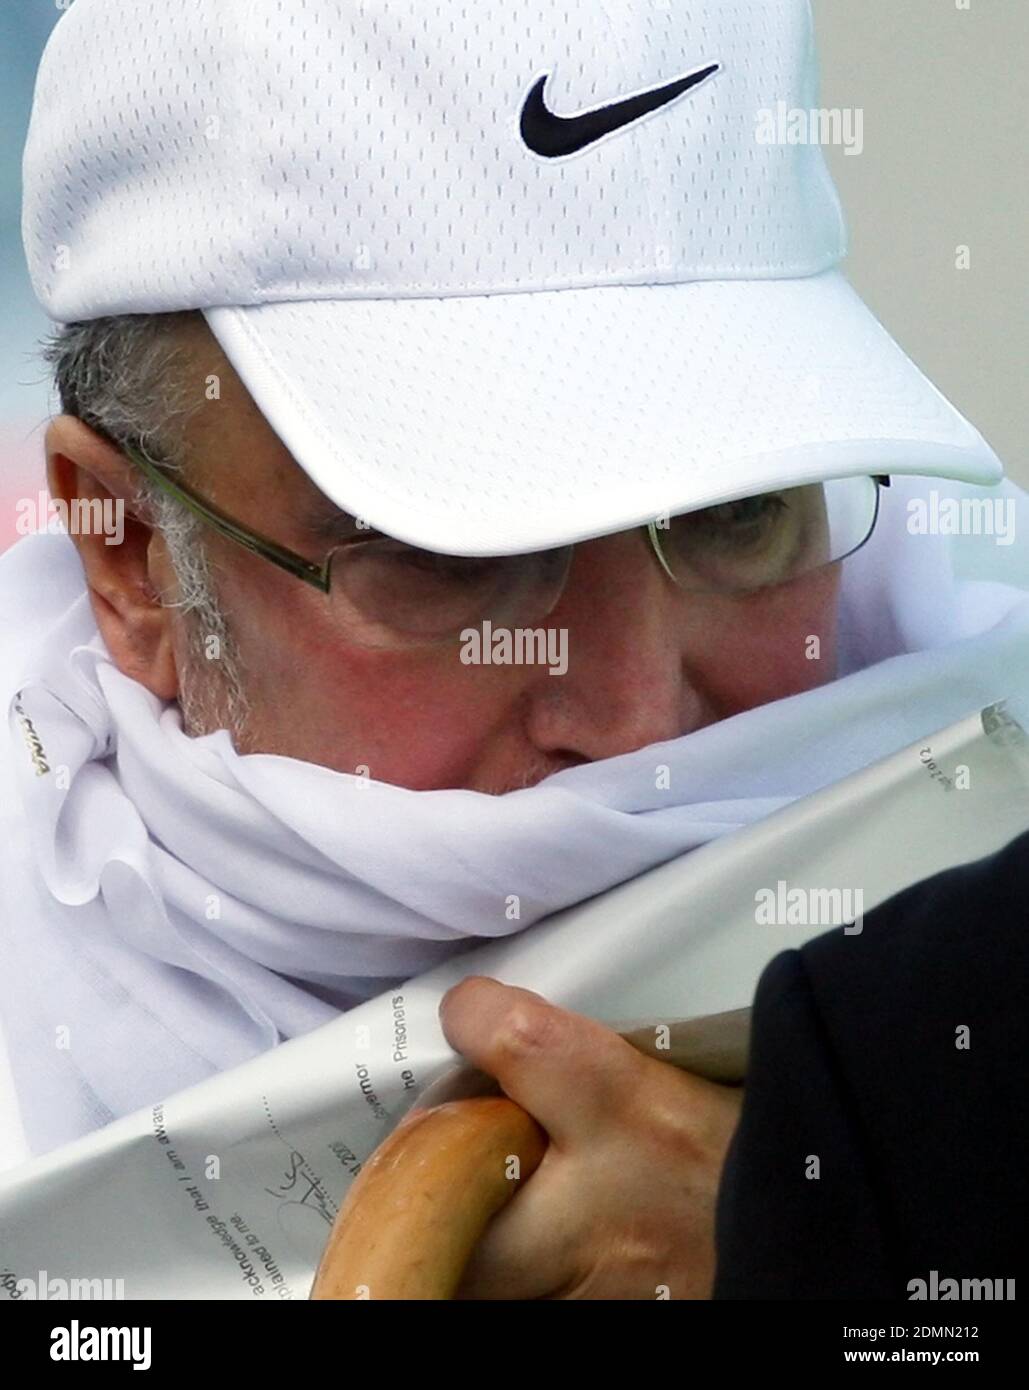 File photo dated 20/8/2009 of Abdelbaset al-Megrahi. Dr Jim Swire, the father of a Lockerbie bombing victim, has said he hopes 'some truth will come out' after it emerged the US Justice Department expects to unseal charges in connection with the attack. The bombing of Pan Am flight 103, travelling from London to New York on December 21 1988, killed 270 people in Britain's largest terrorist atrocity. Stock Photo